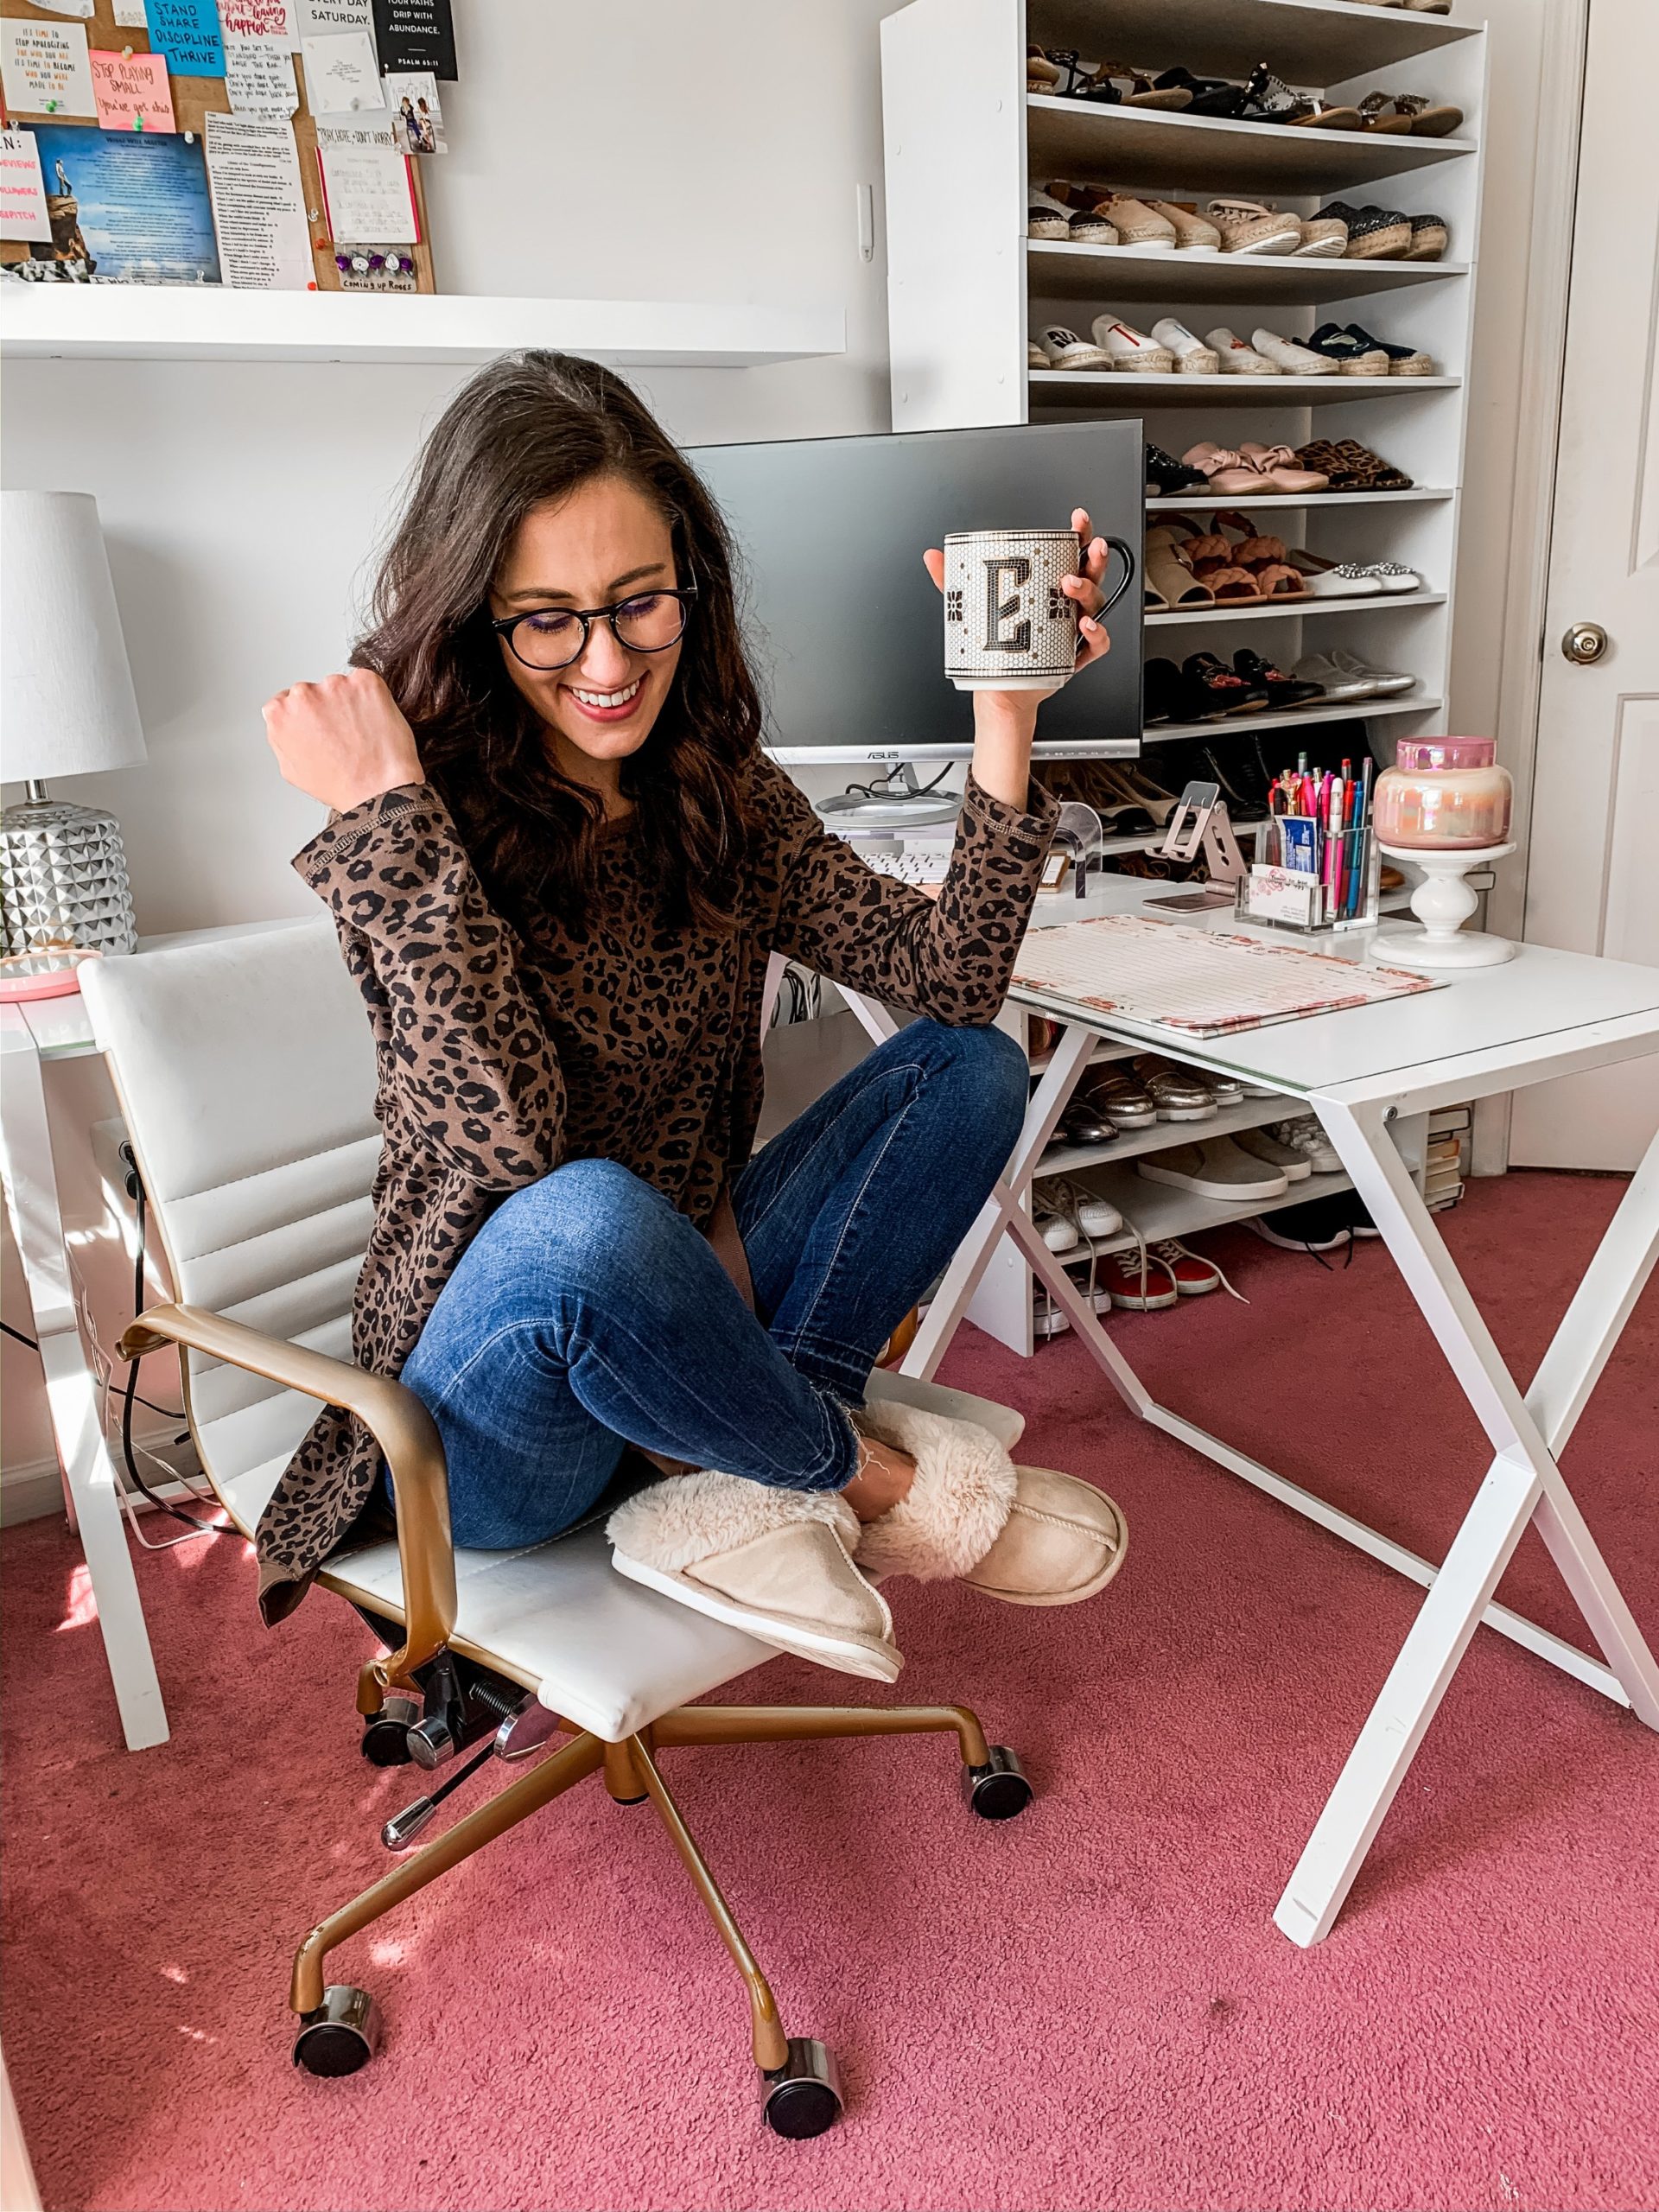 15 Tips for Being the Most Productive Working from Home (from a WFH Veteran!)